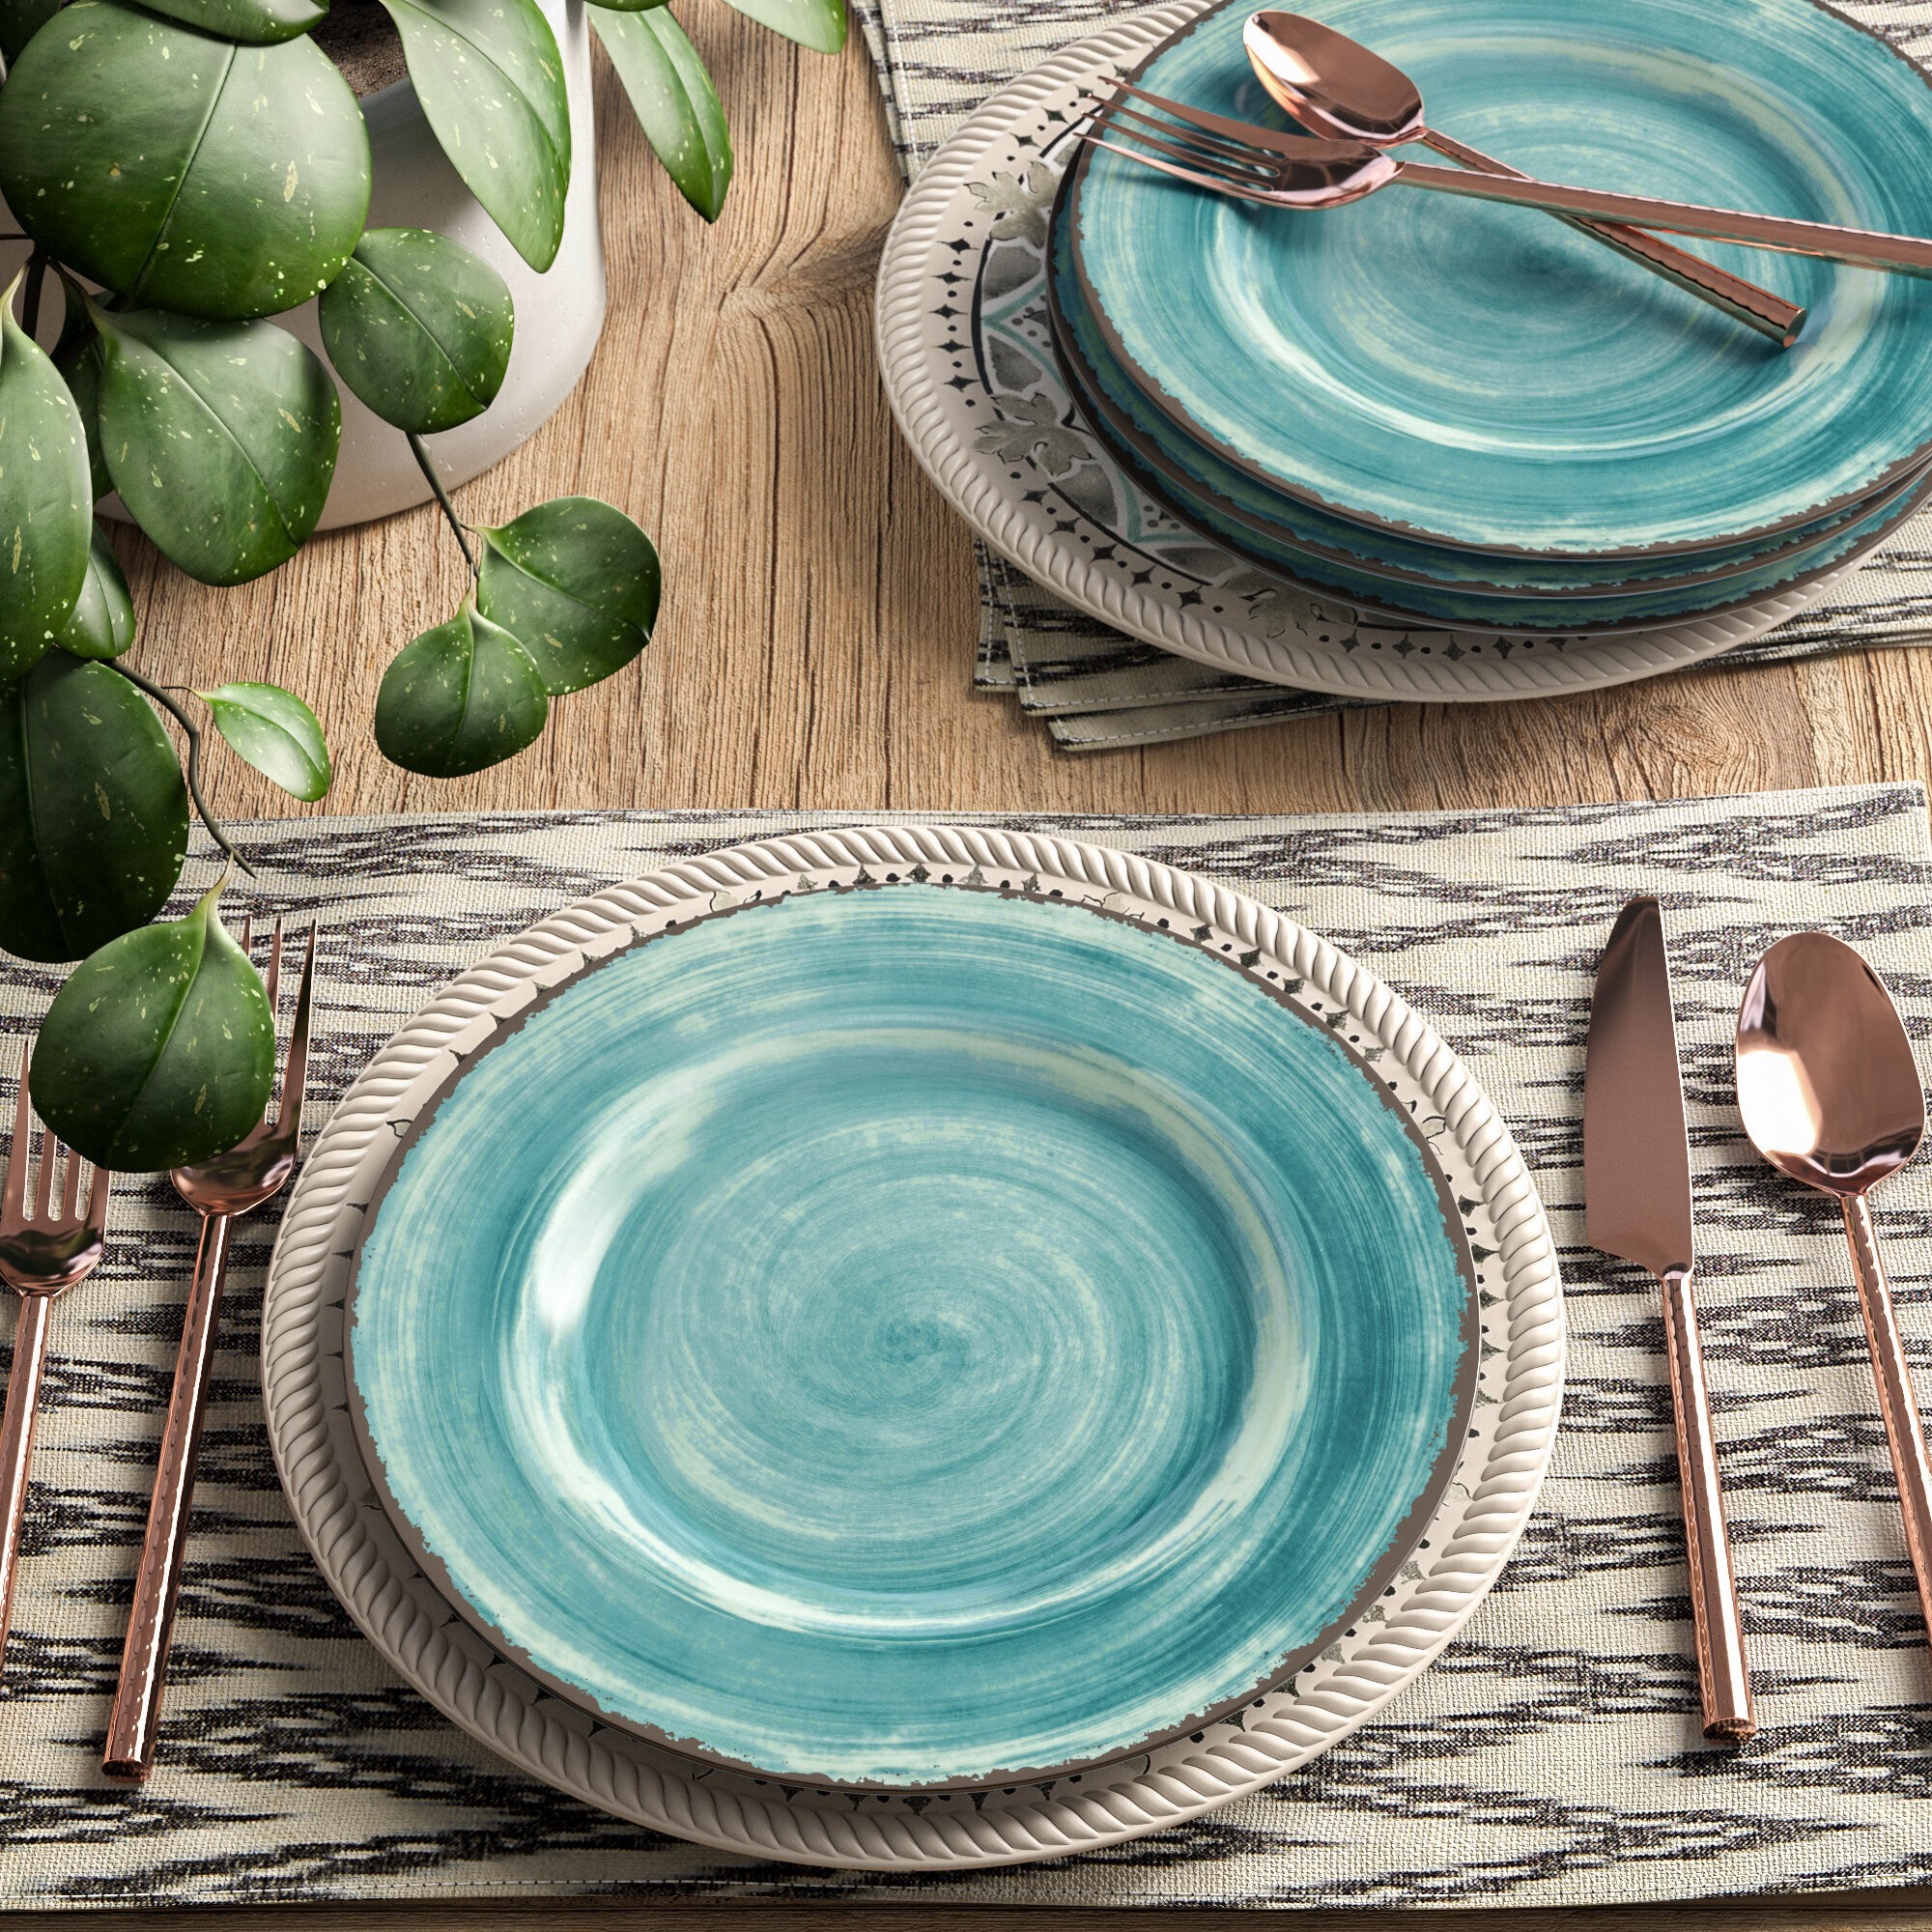 How to Choose Dinner Plates - Foter